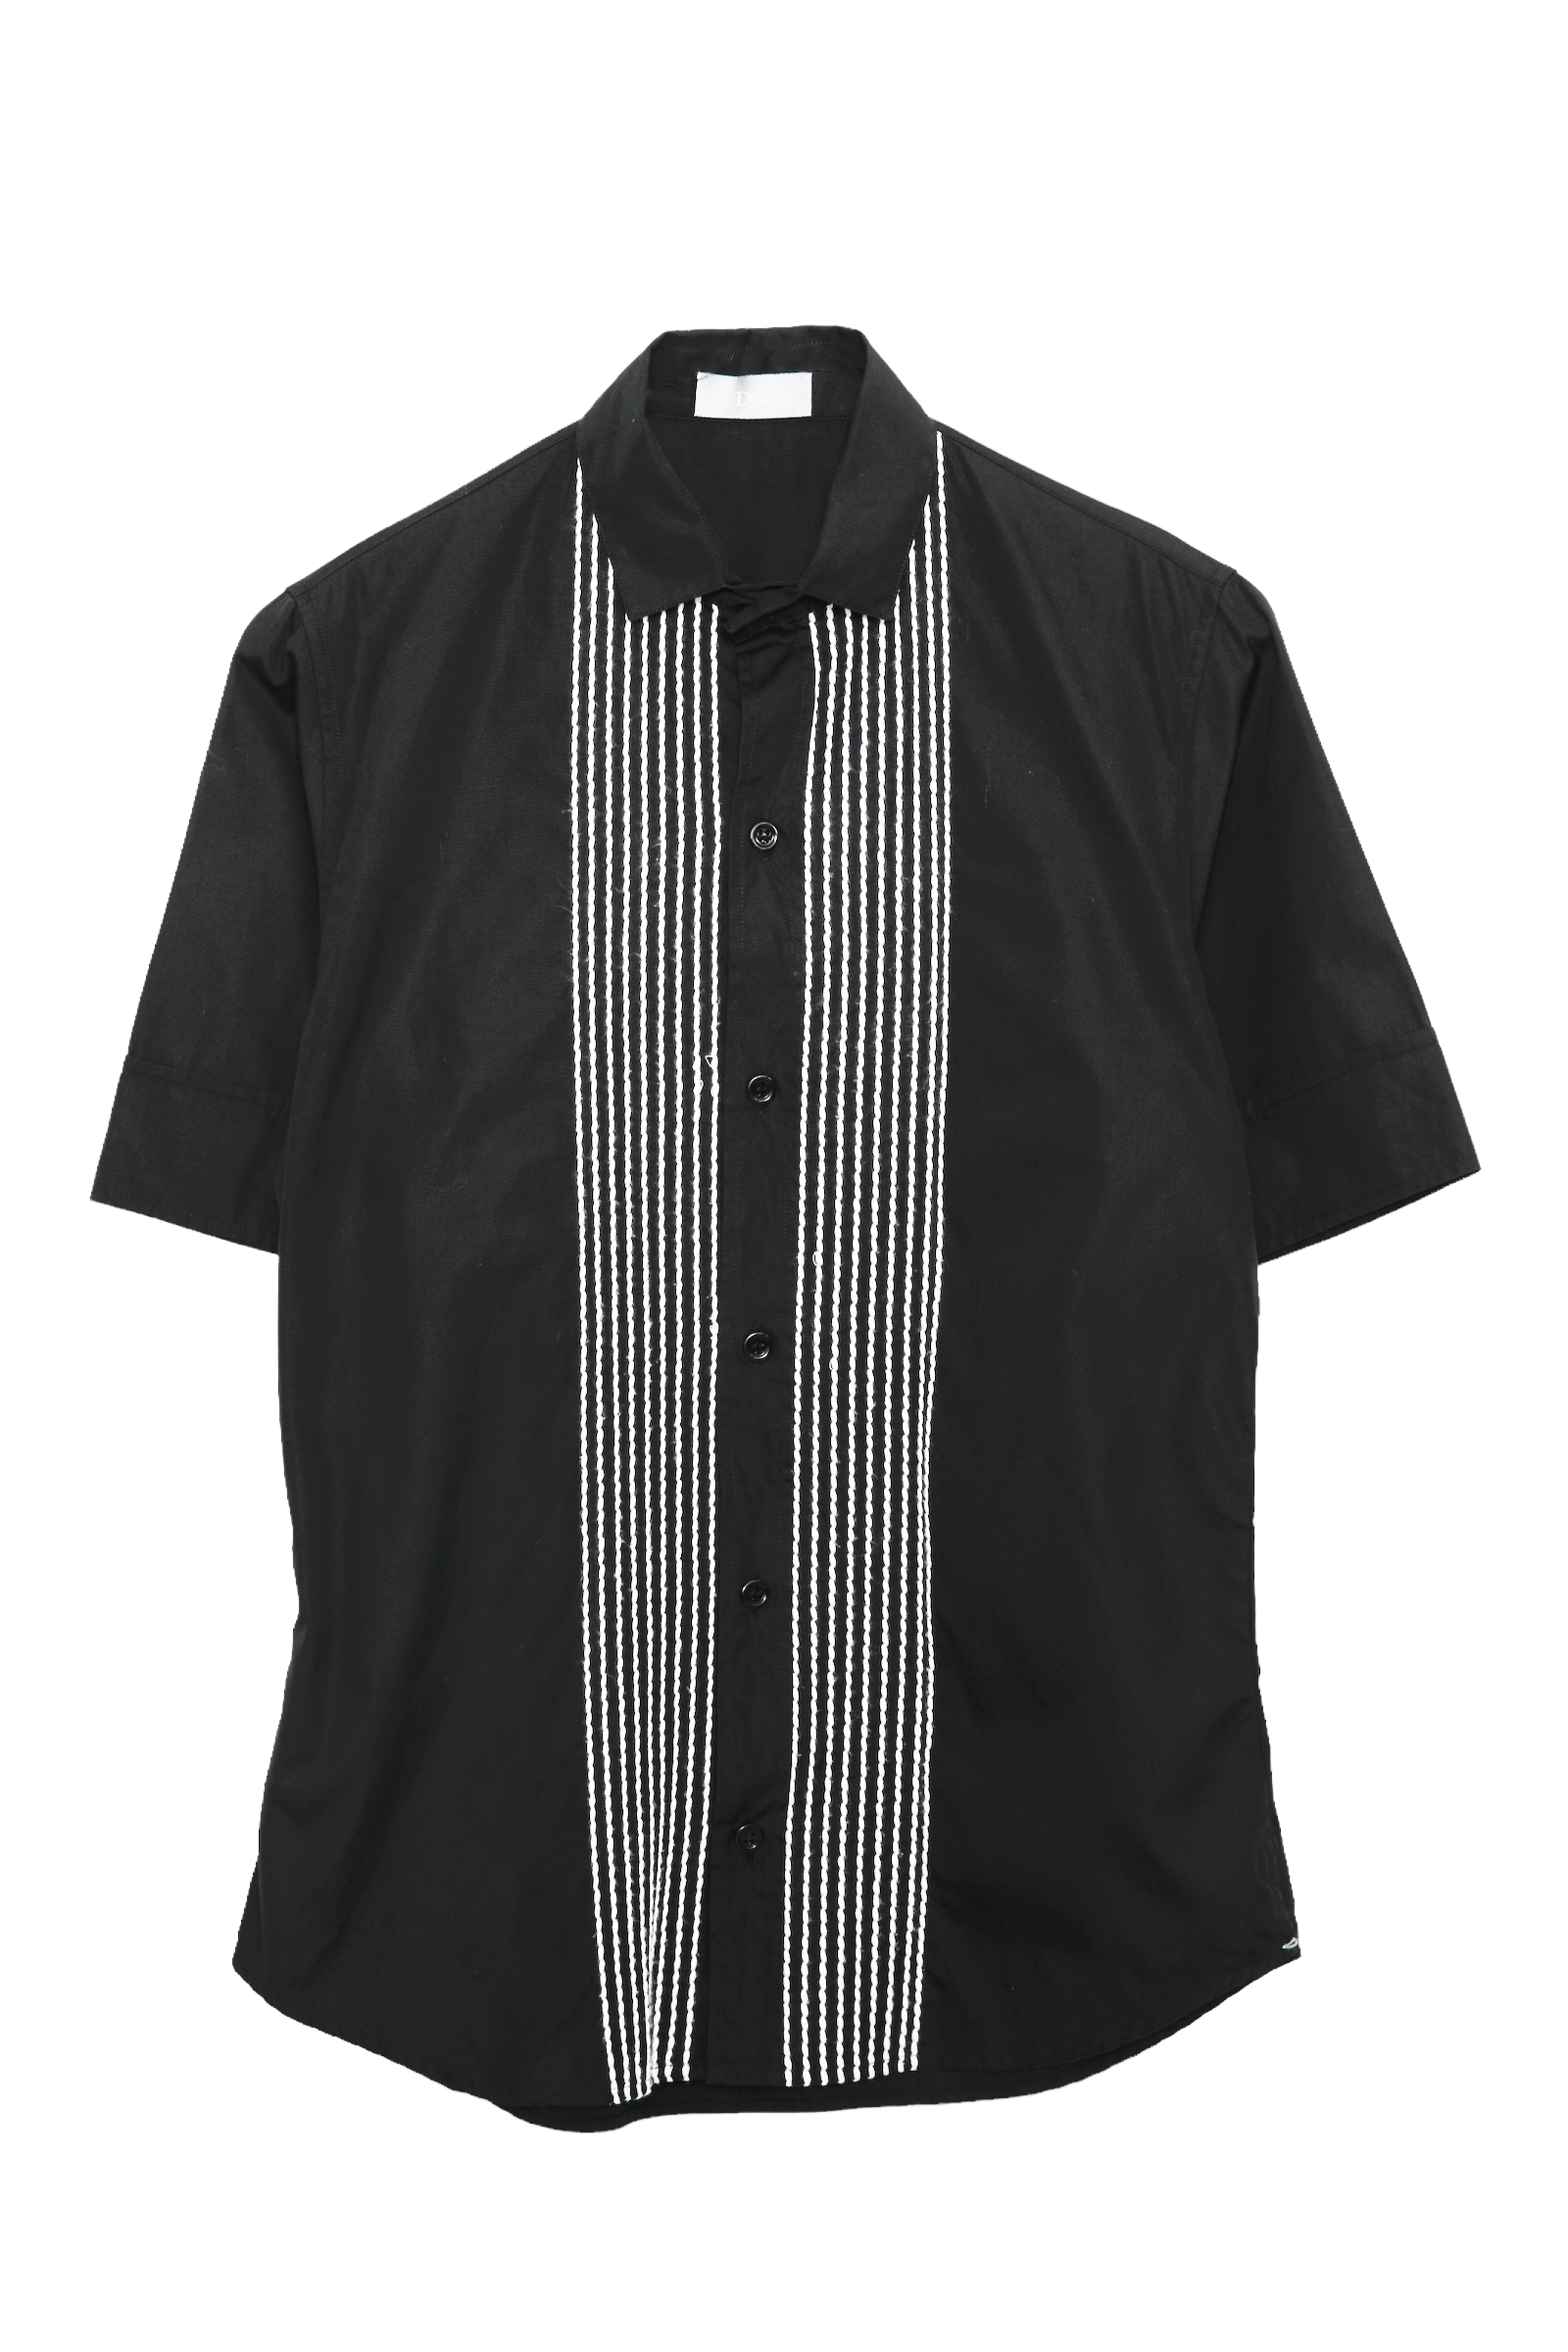 2006S/S DIOR HOMME STITCHED SHORT SLEEVE SHIRT